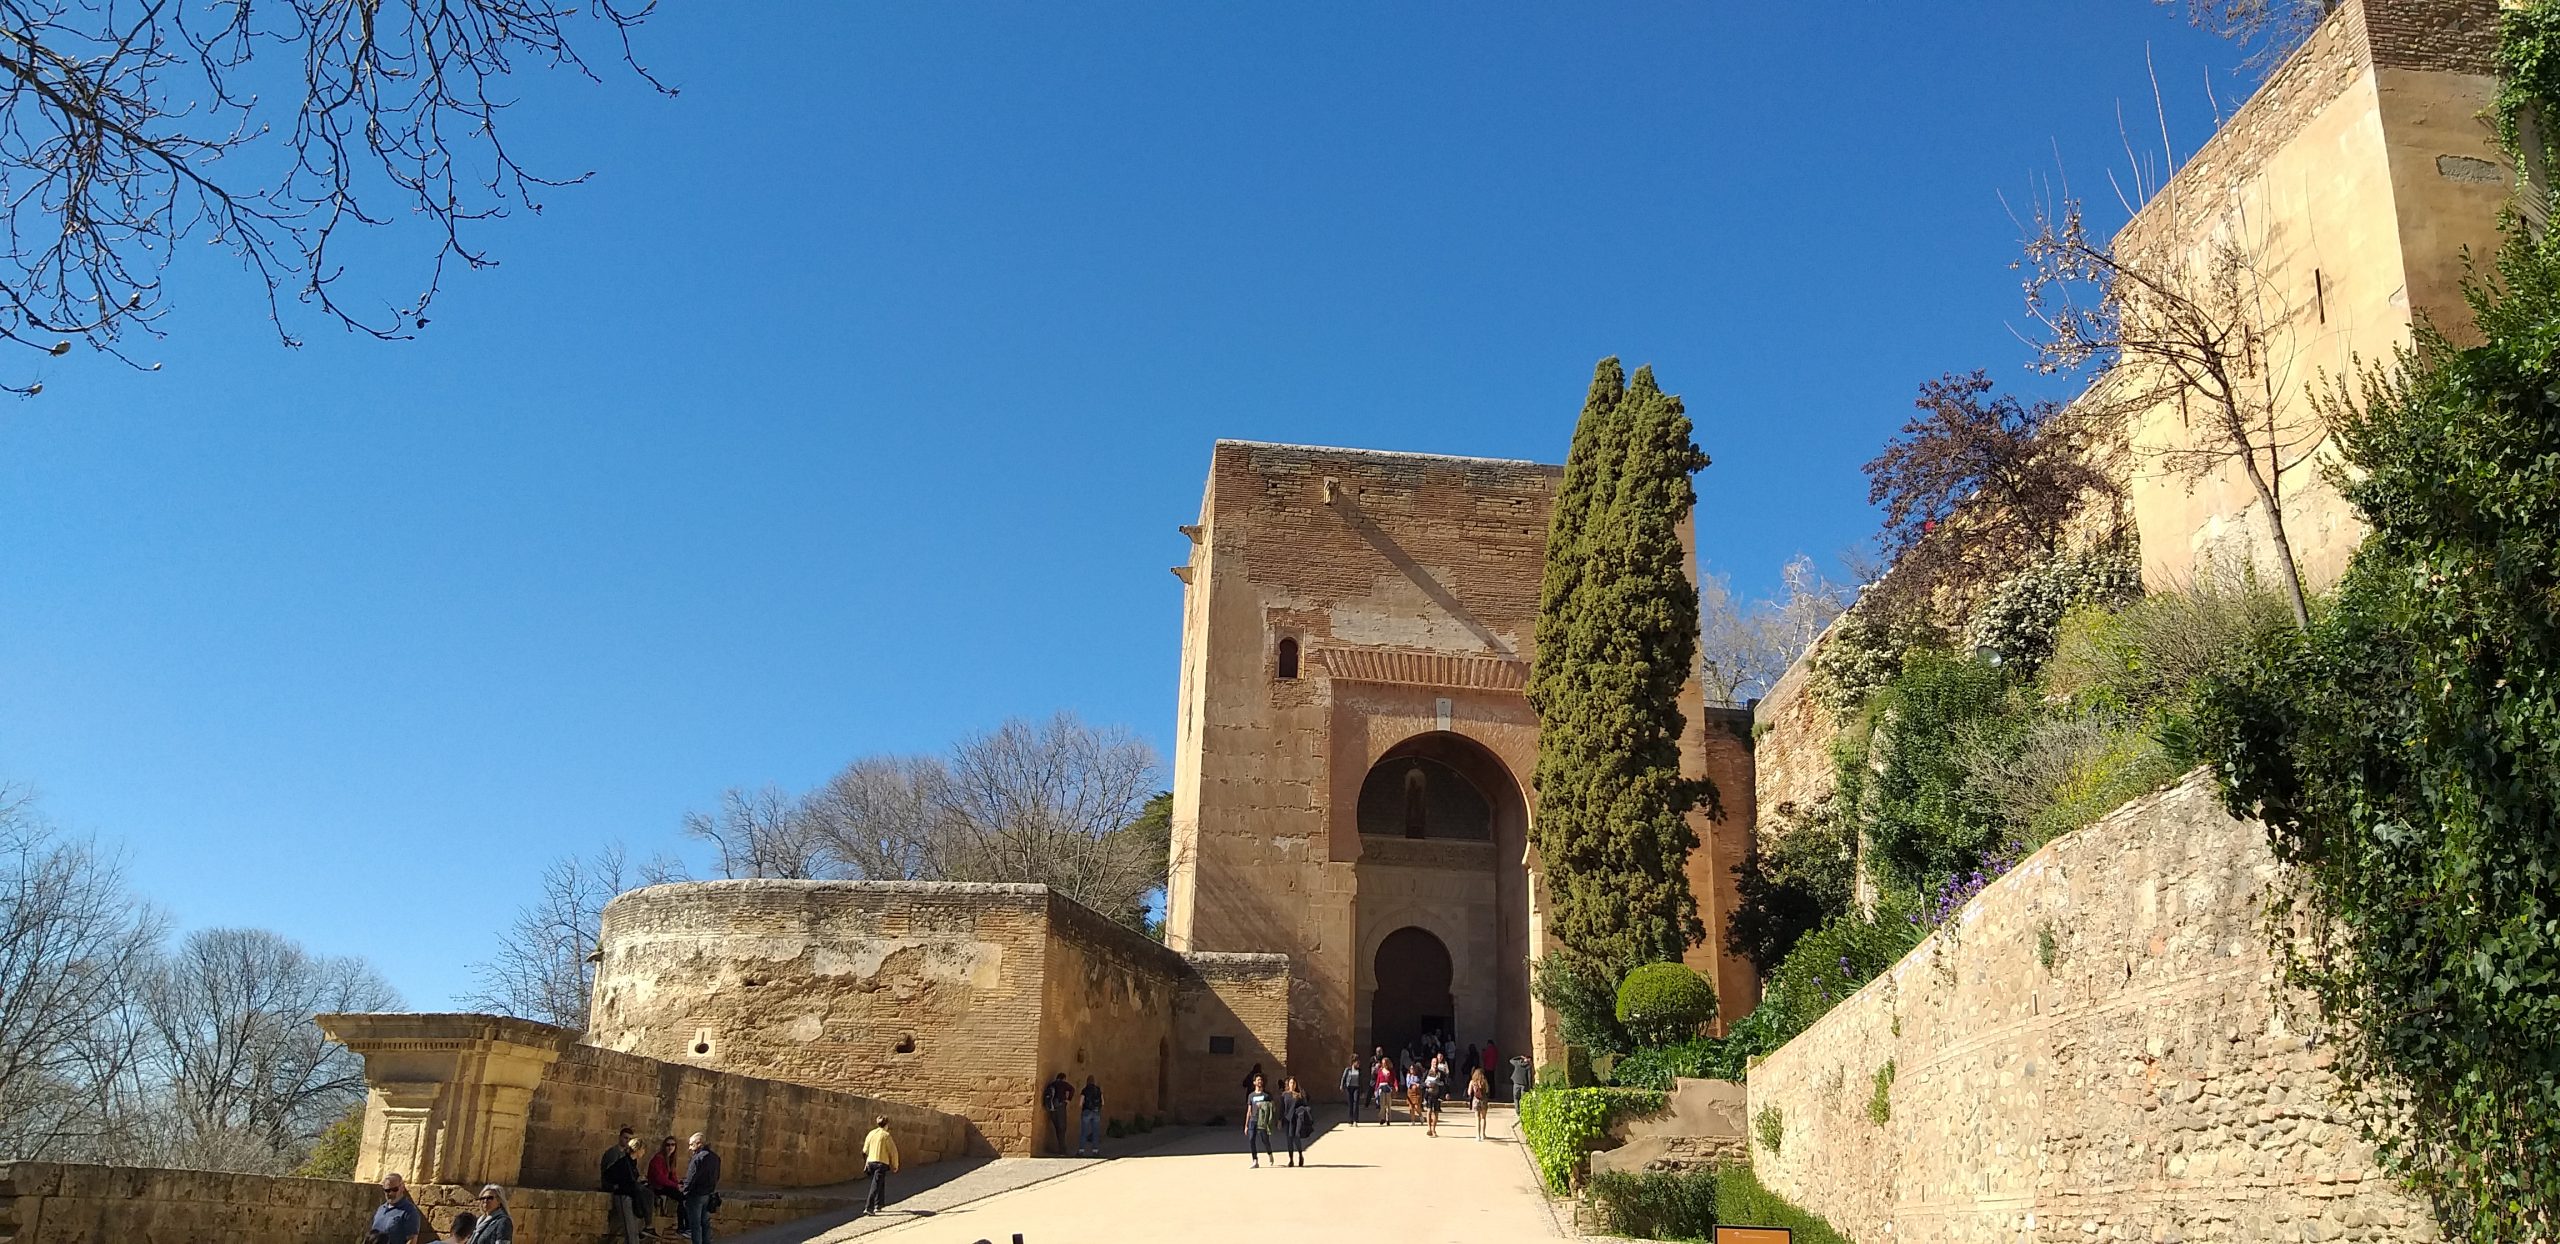 How to secure tickets for the La Alhambra palace in Granada?